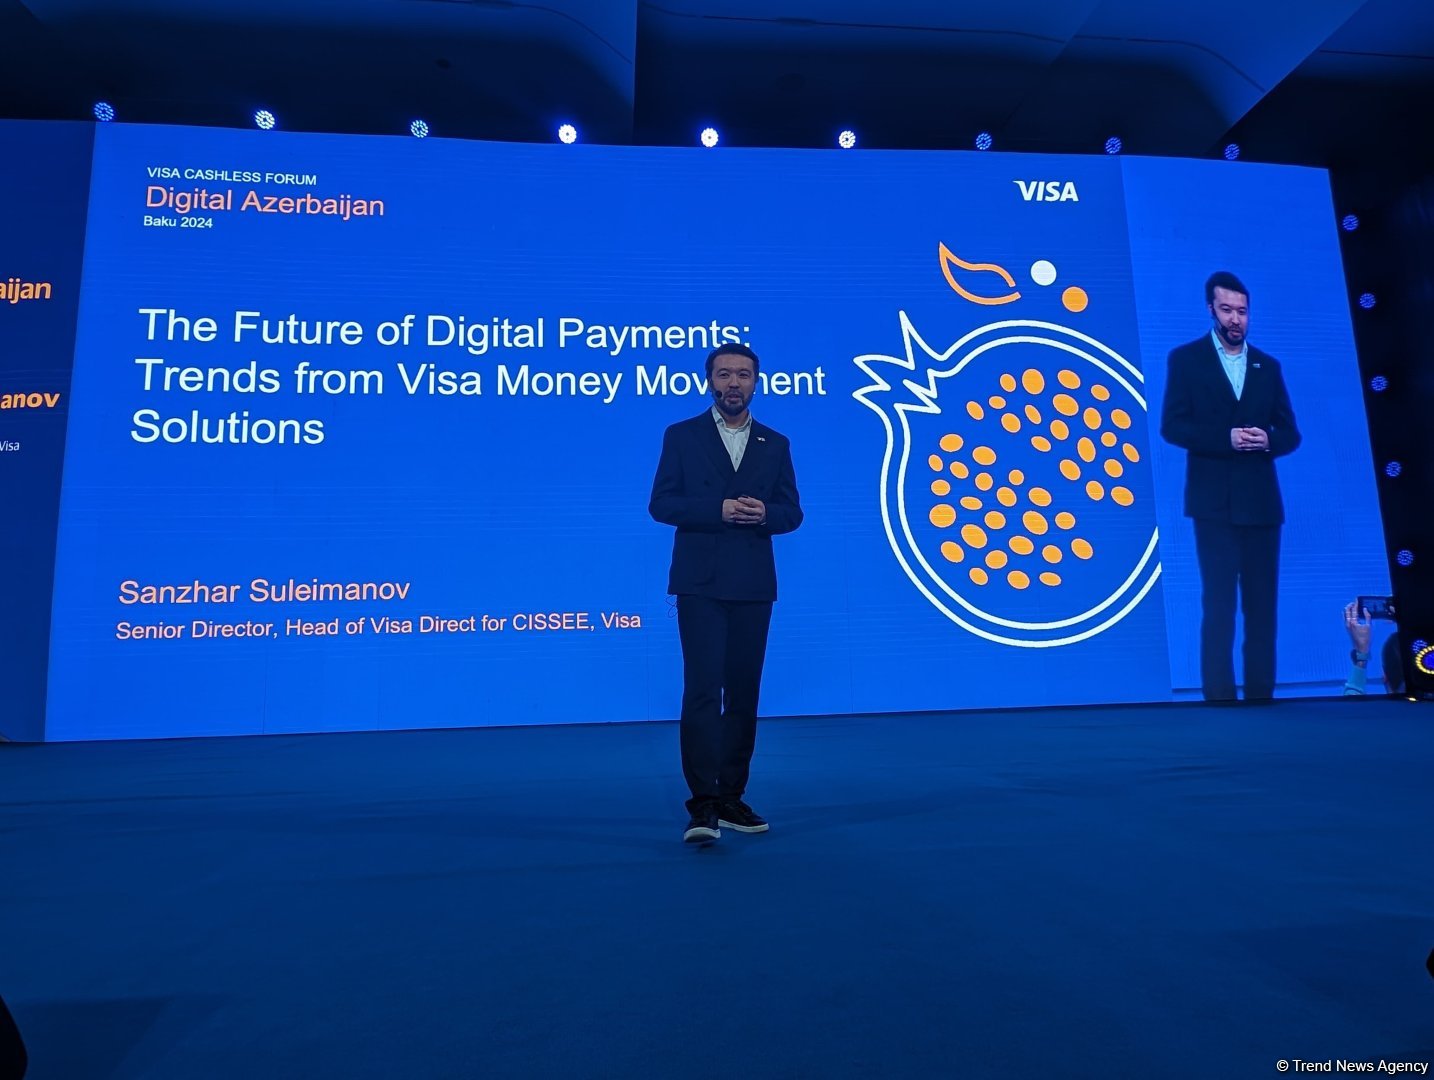 Azerbaijan stands out as one of Visa Direct's largest and fastest-evolving markets